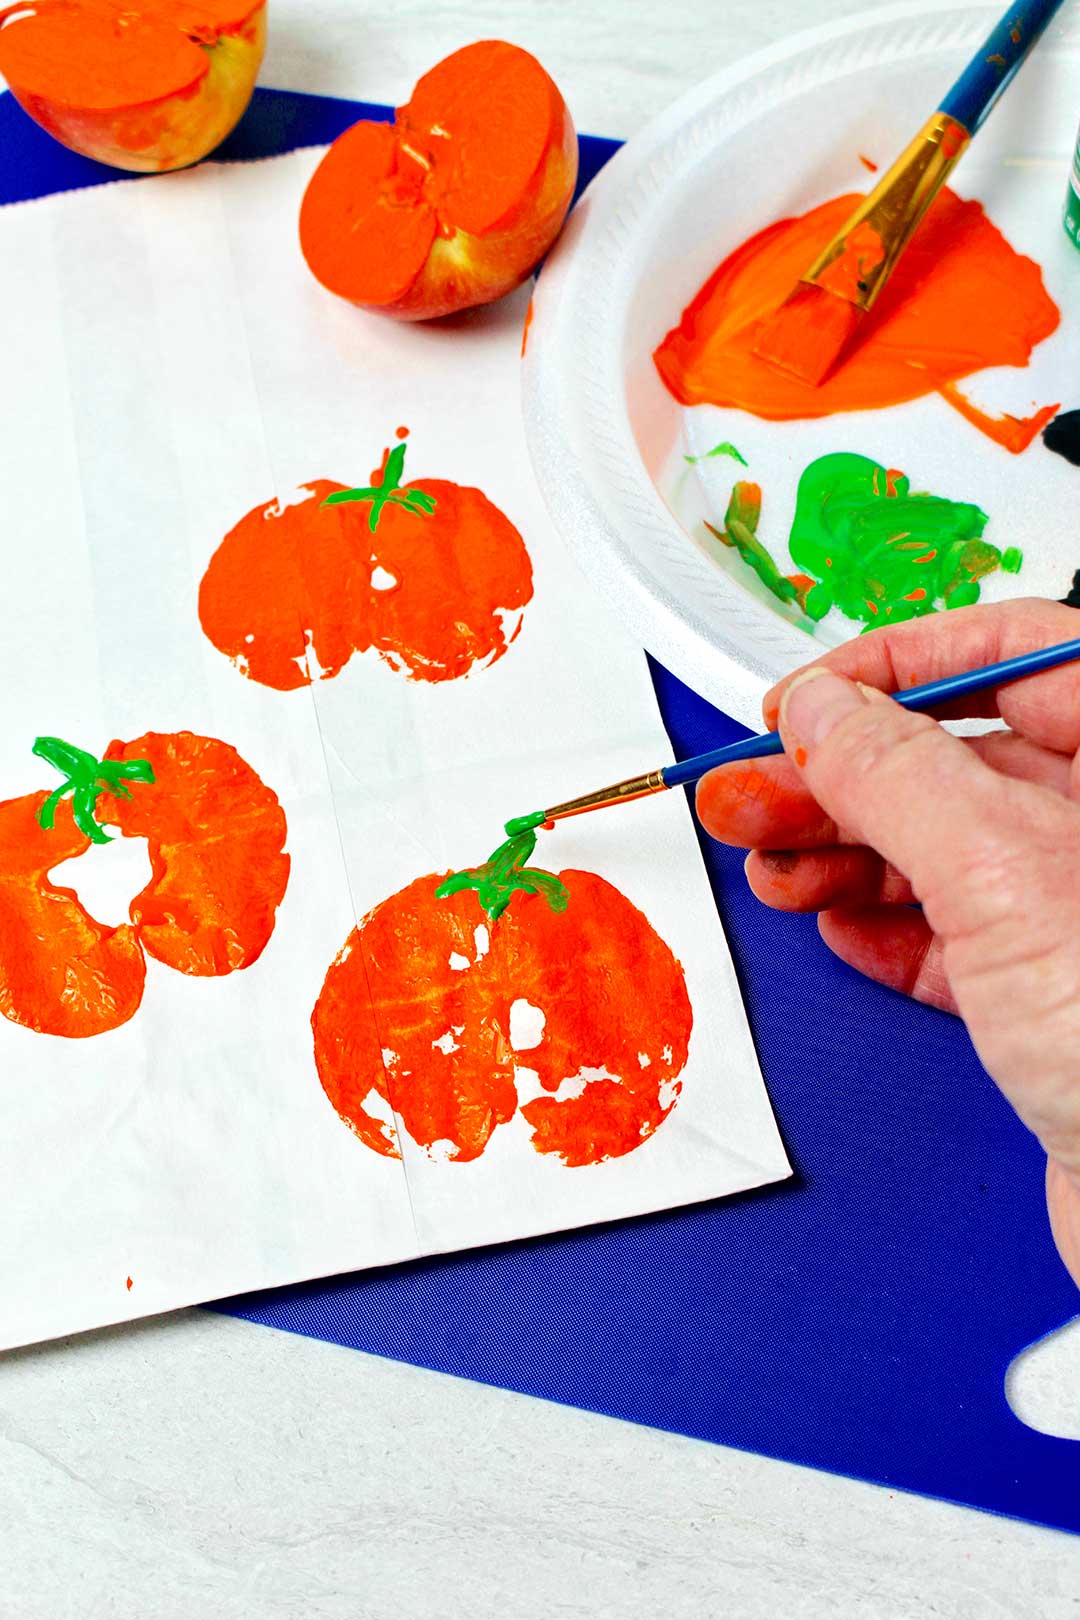 Person painting green stems on orange pumpkin prints with painted apple halves and paint nearby.